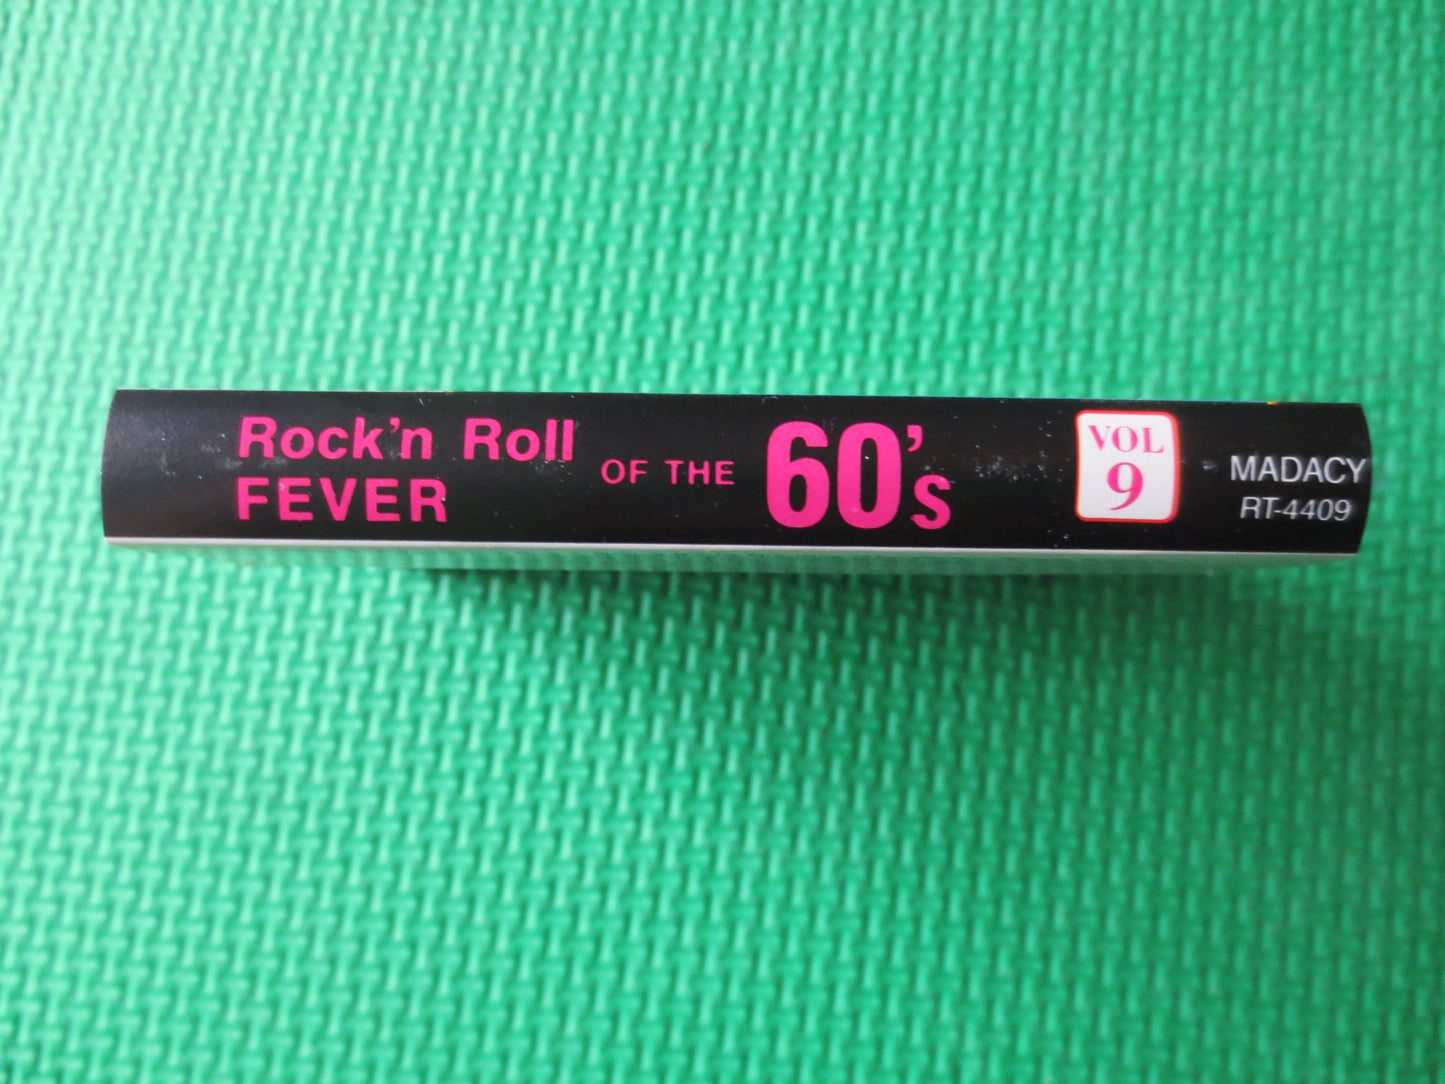 ROCK and ROLL, Vol 9, FEVER of the 60s, Rock and Roll Tapes, Vintage Cassette, Tape Cassette, Tapes, Music Cassette, 1970 Cassette